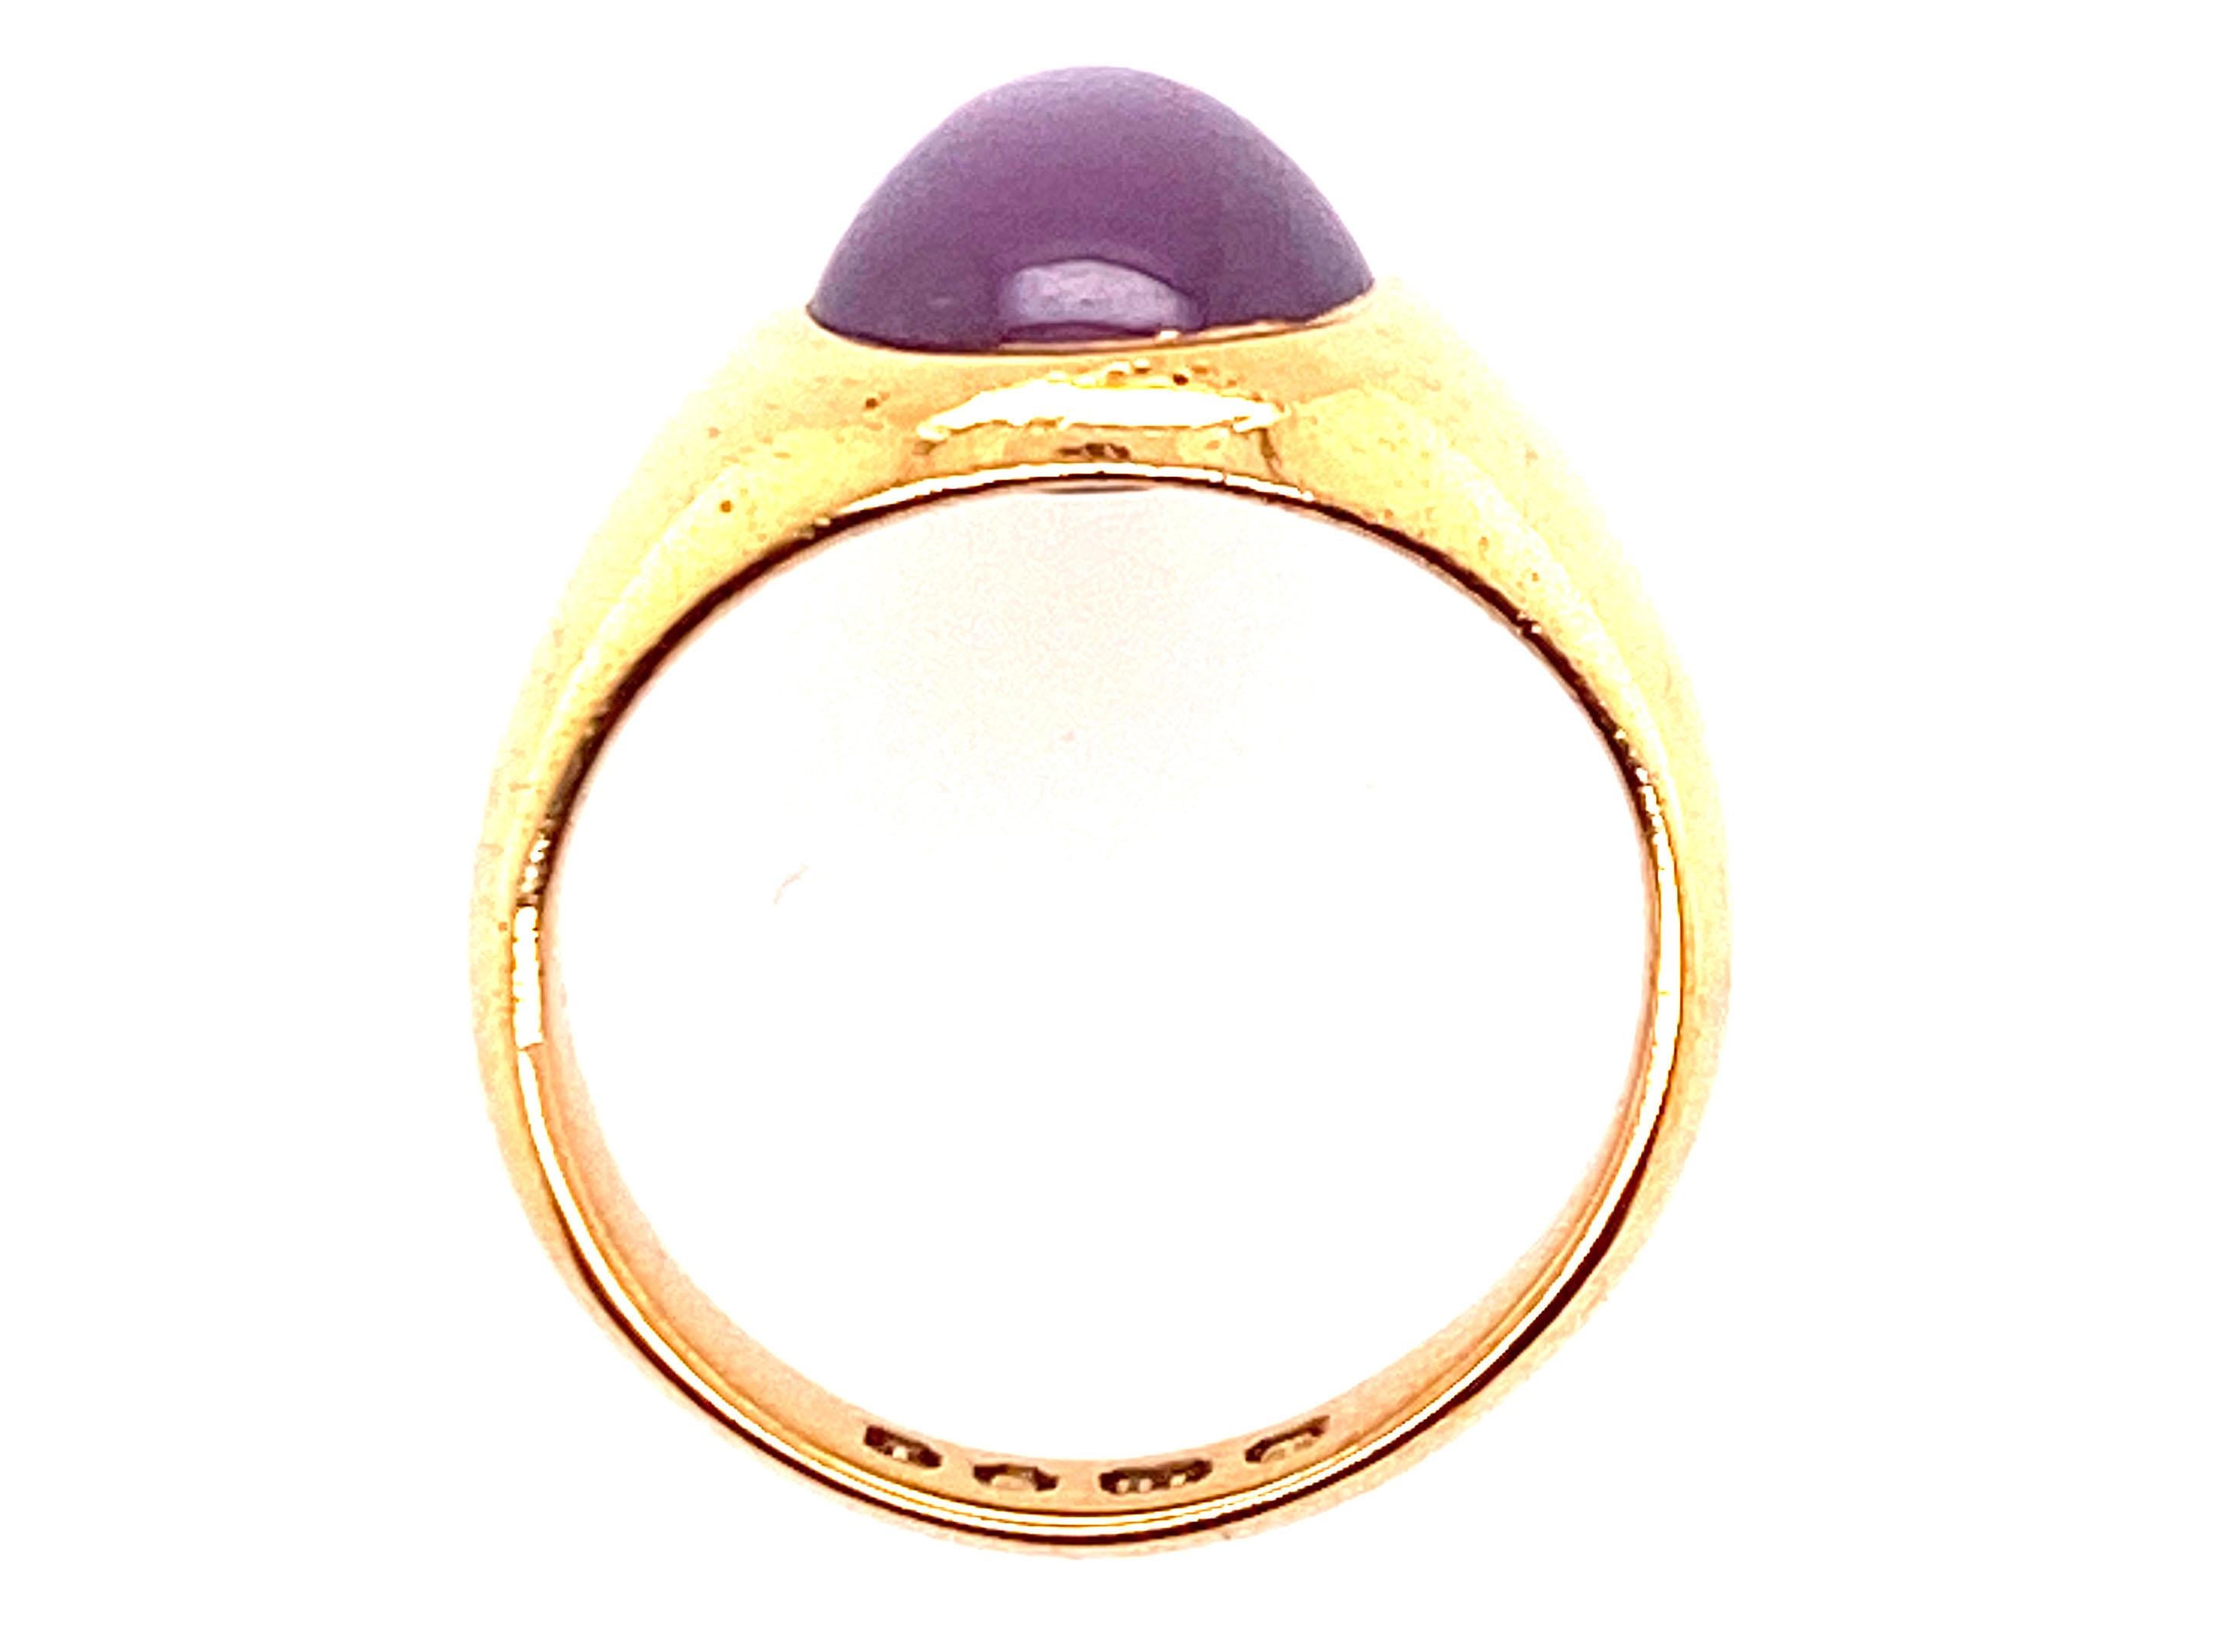 Genuine Original Georgian Antique from 1818  Purple Star Sapphire Cocktail Ring 18K Yellow Gold 


Featuring a Gorgeous 10mm Genuine Natural Round Cabochon Purple Star Sapphire Center

Hallmarks Confirm That This is a 18K Gold Ring Made in England